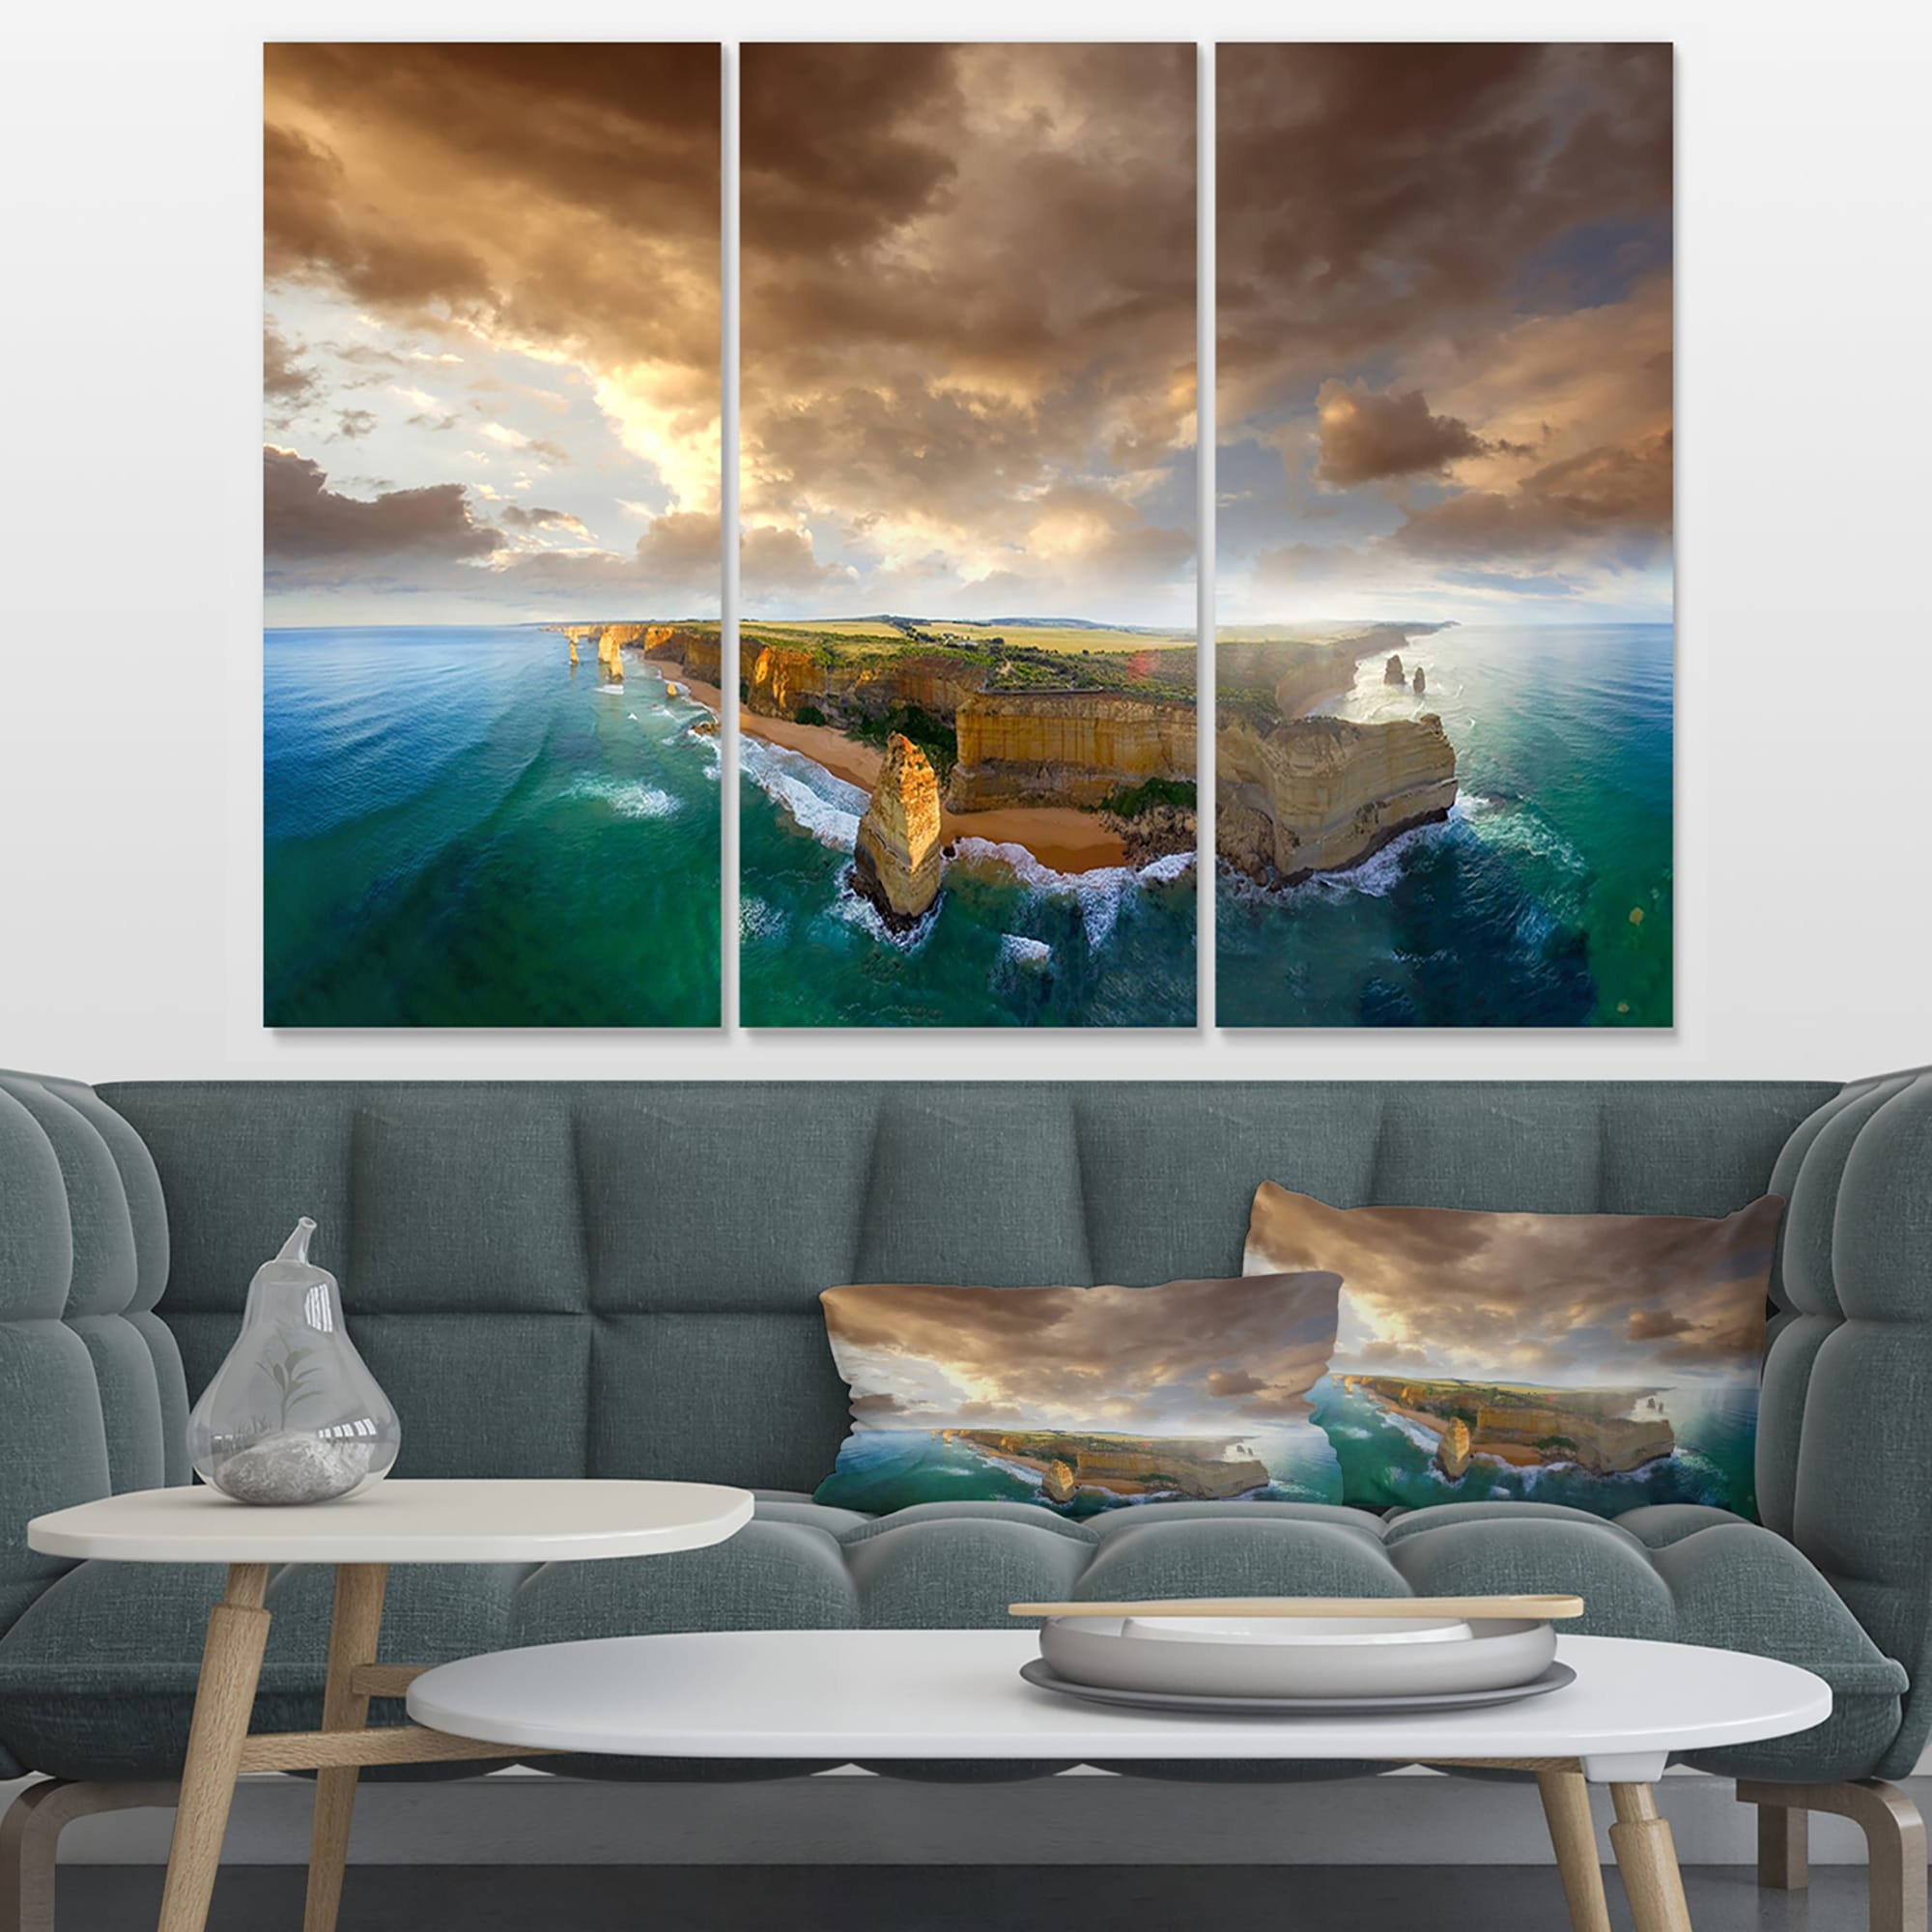 Wall Art For Living Room Large Size Wall Decorations Pictures Blue Sun Beach Grass Ocean Landscape Painting Office Wall Decor Canvas Prints Ready To H - 3